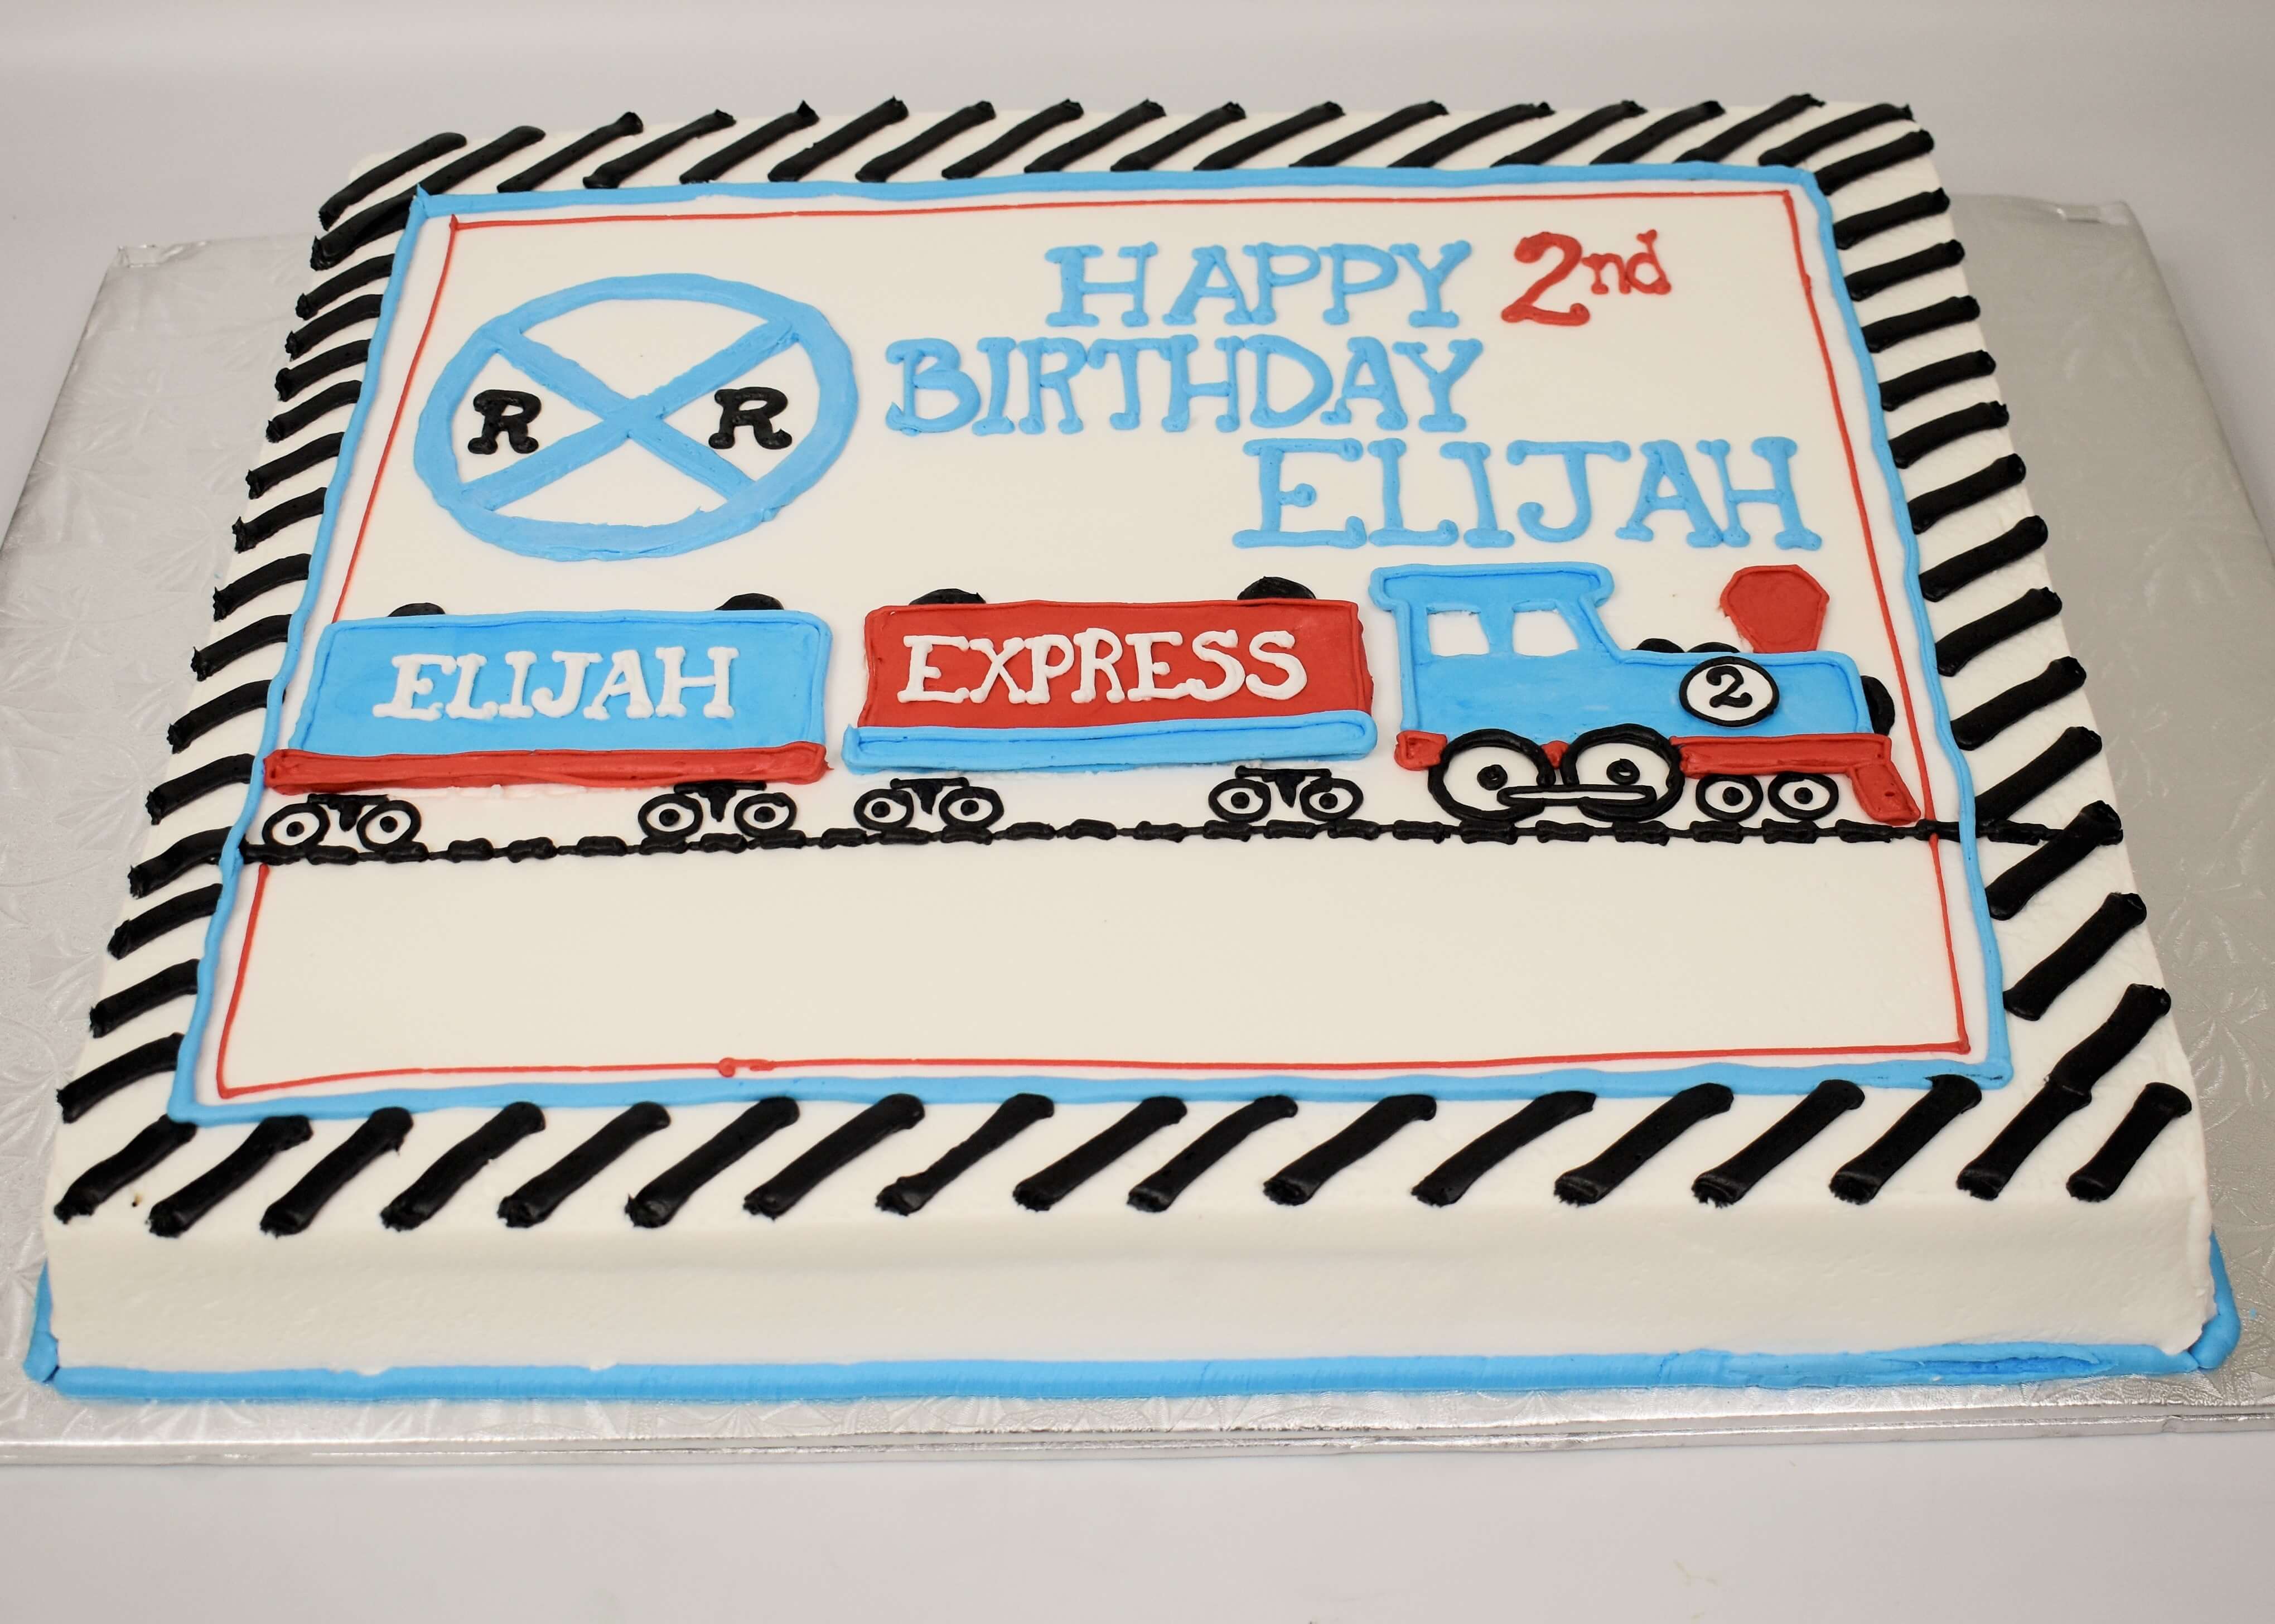 McArthur's Bakery Custom Cake with Blue and Red Train, Rail Road Crossing Sign and Tracks